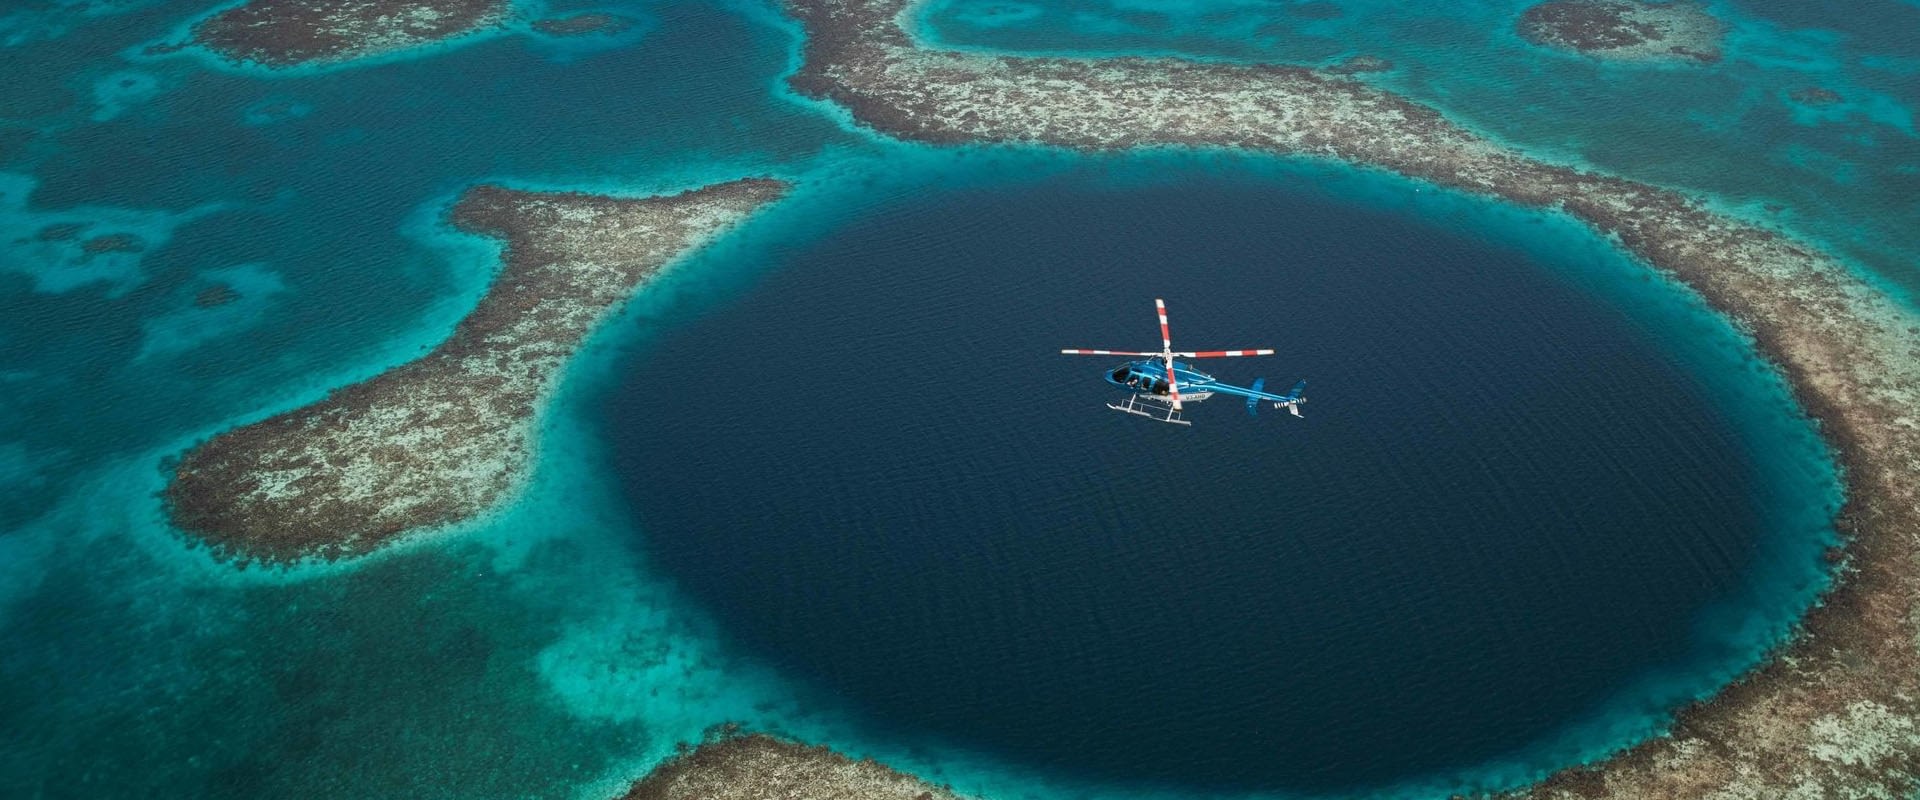 The Great Blue Hole & Barrier Reef via Helicopter